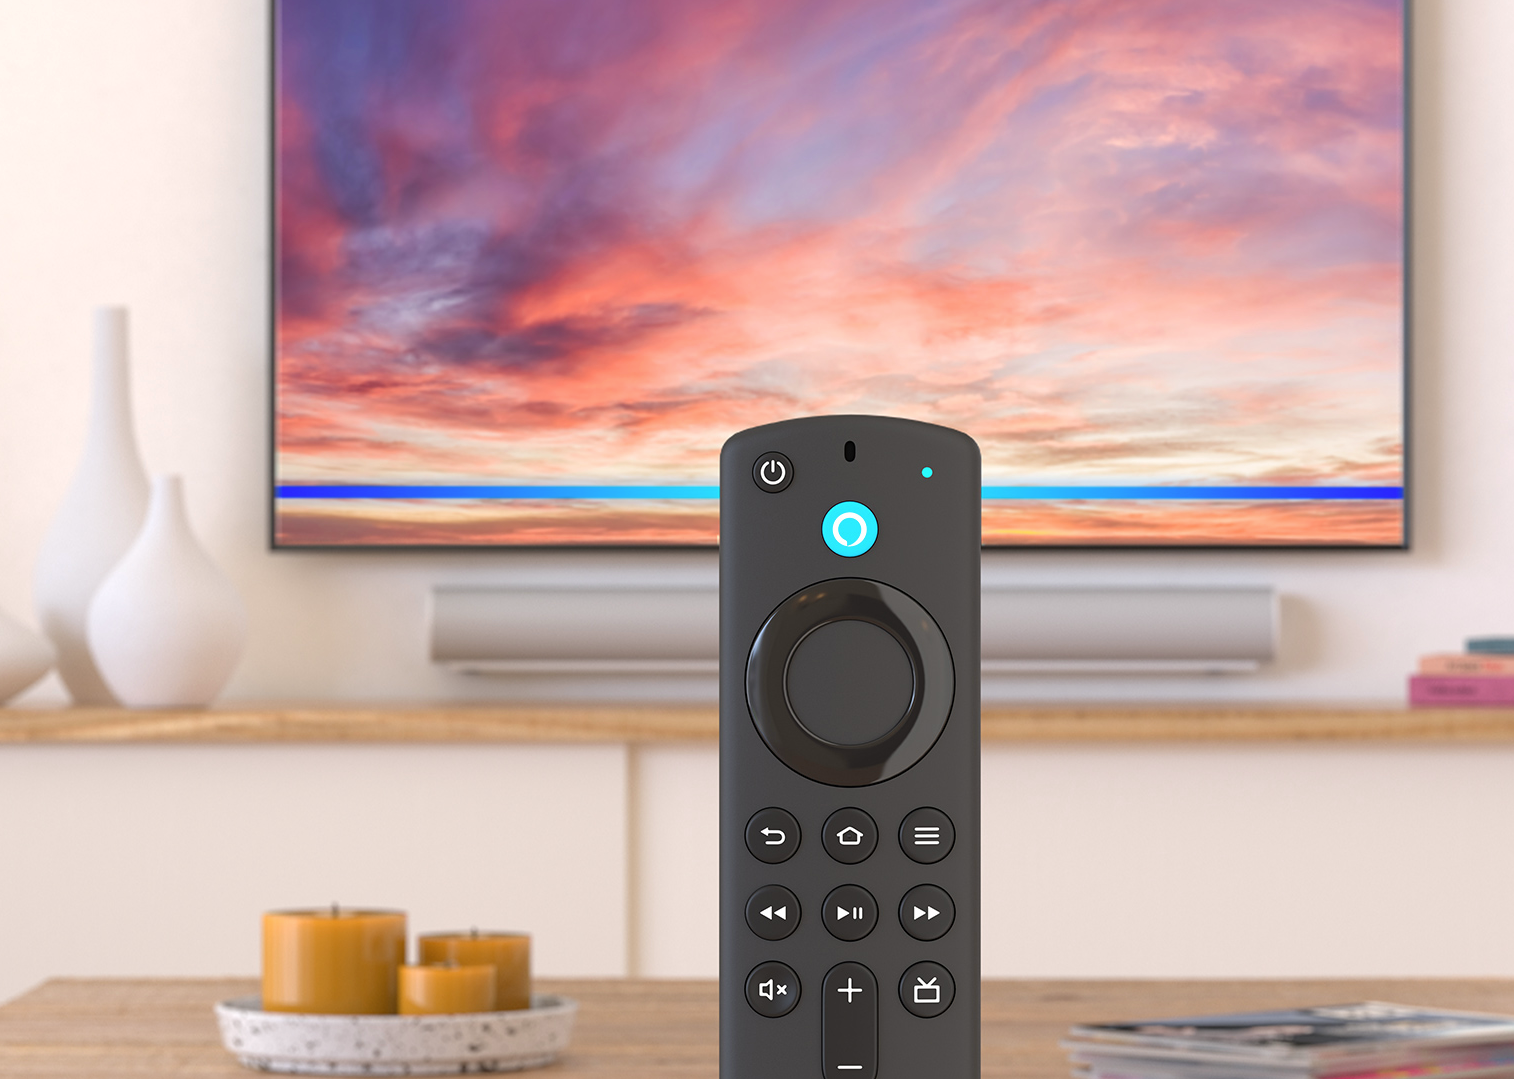 Snag 's New 4K Max Fire TV Stick for 33% Off